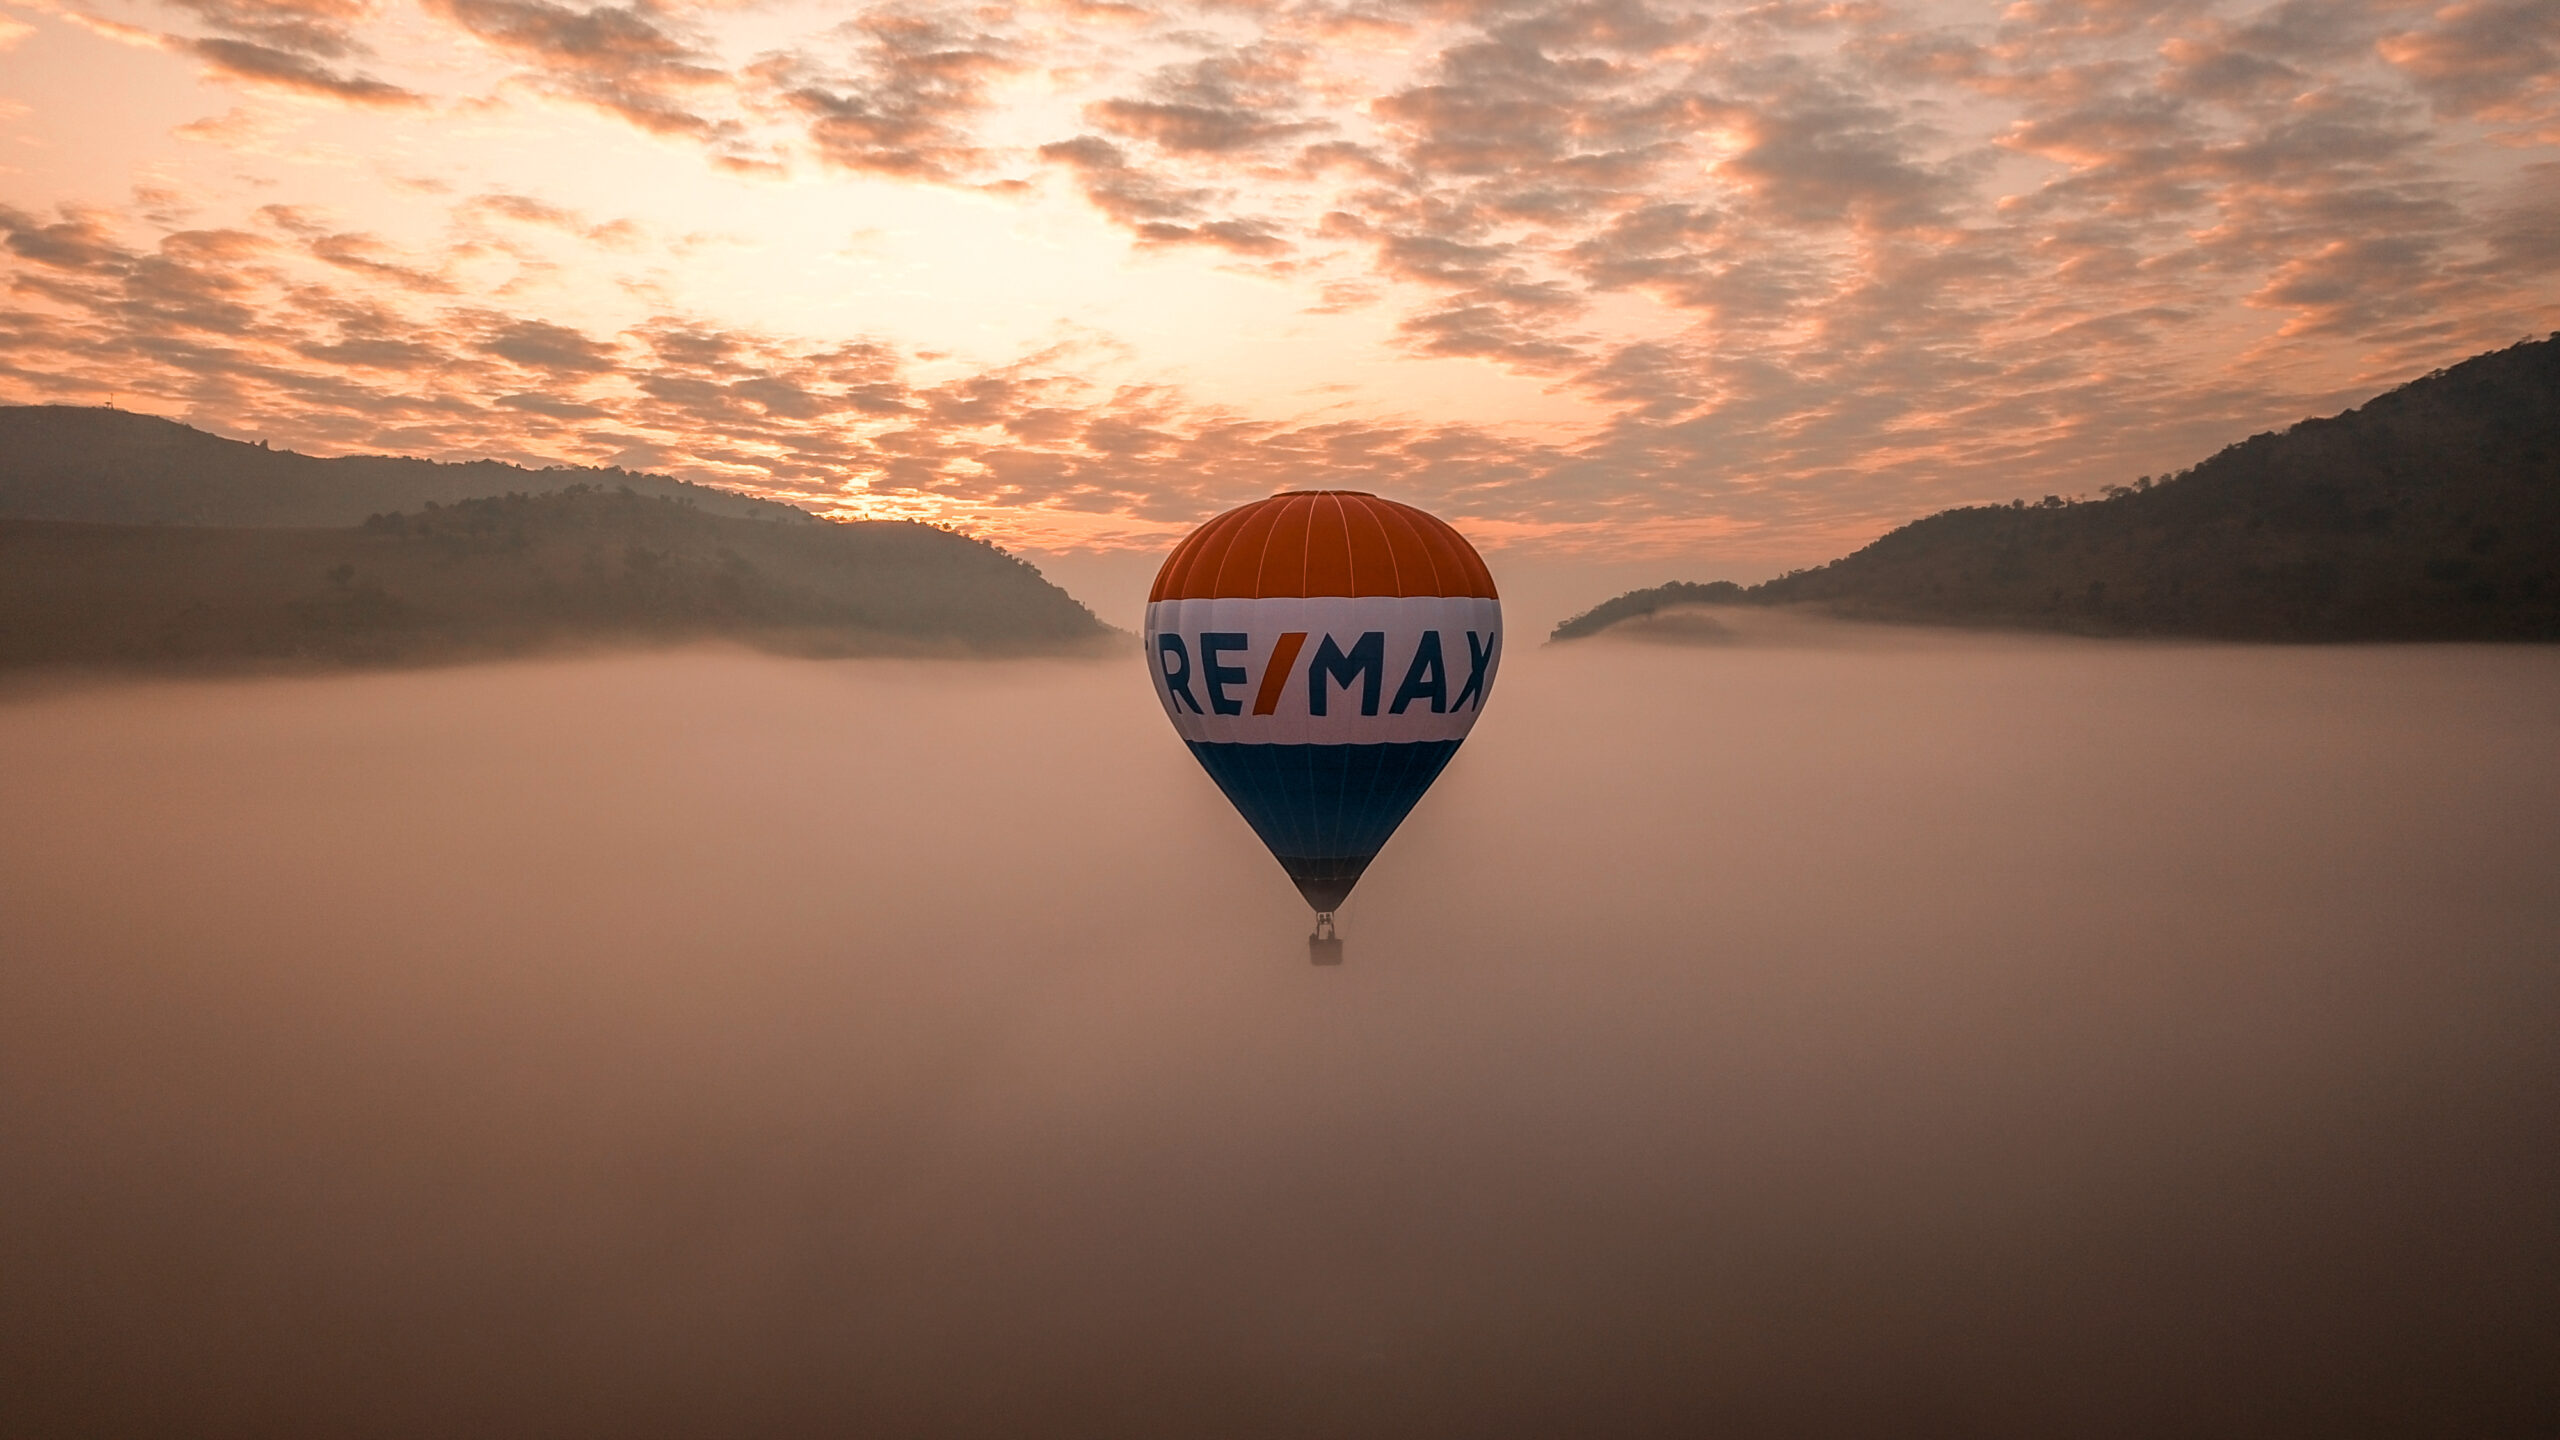 Remax name ballon in the air with fog and mountains around it